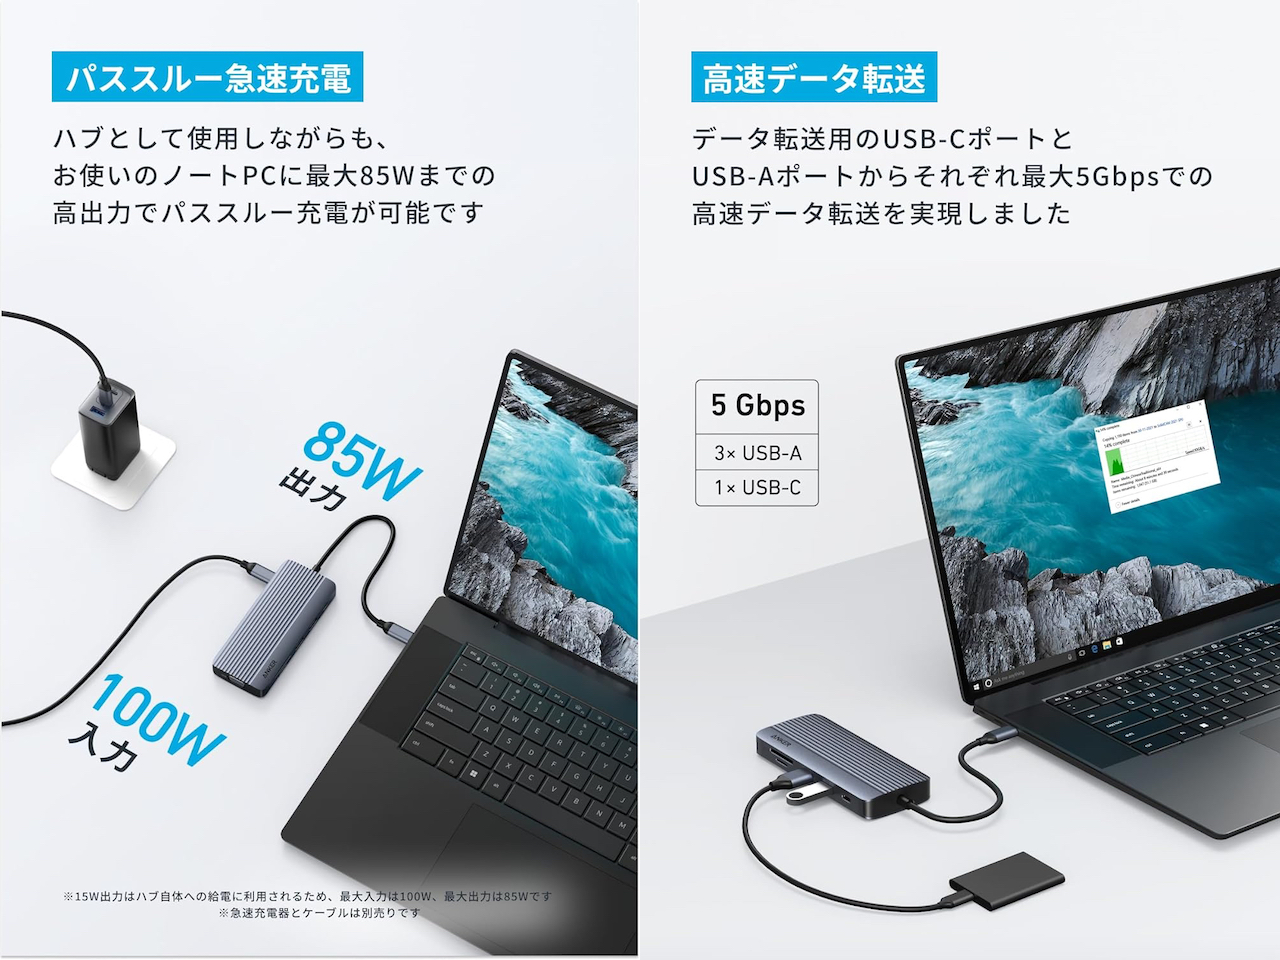 Anker USB-C ハブ (10-in-1, Dual Display)